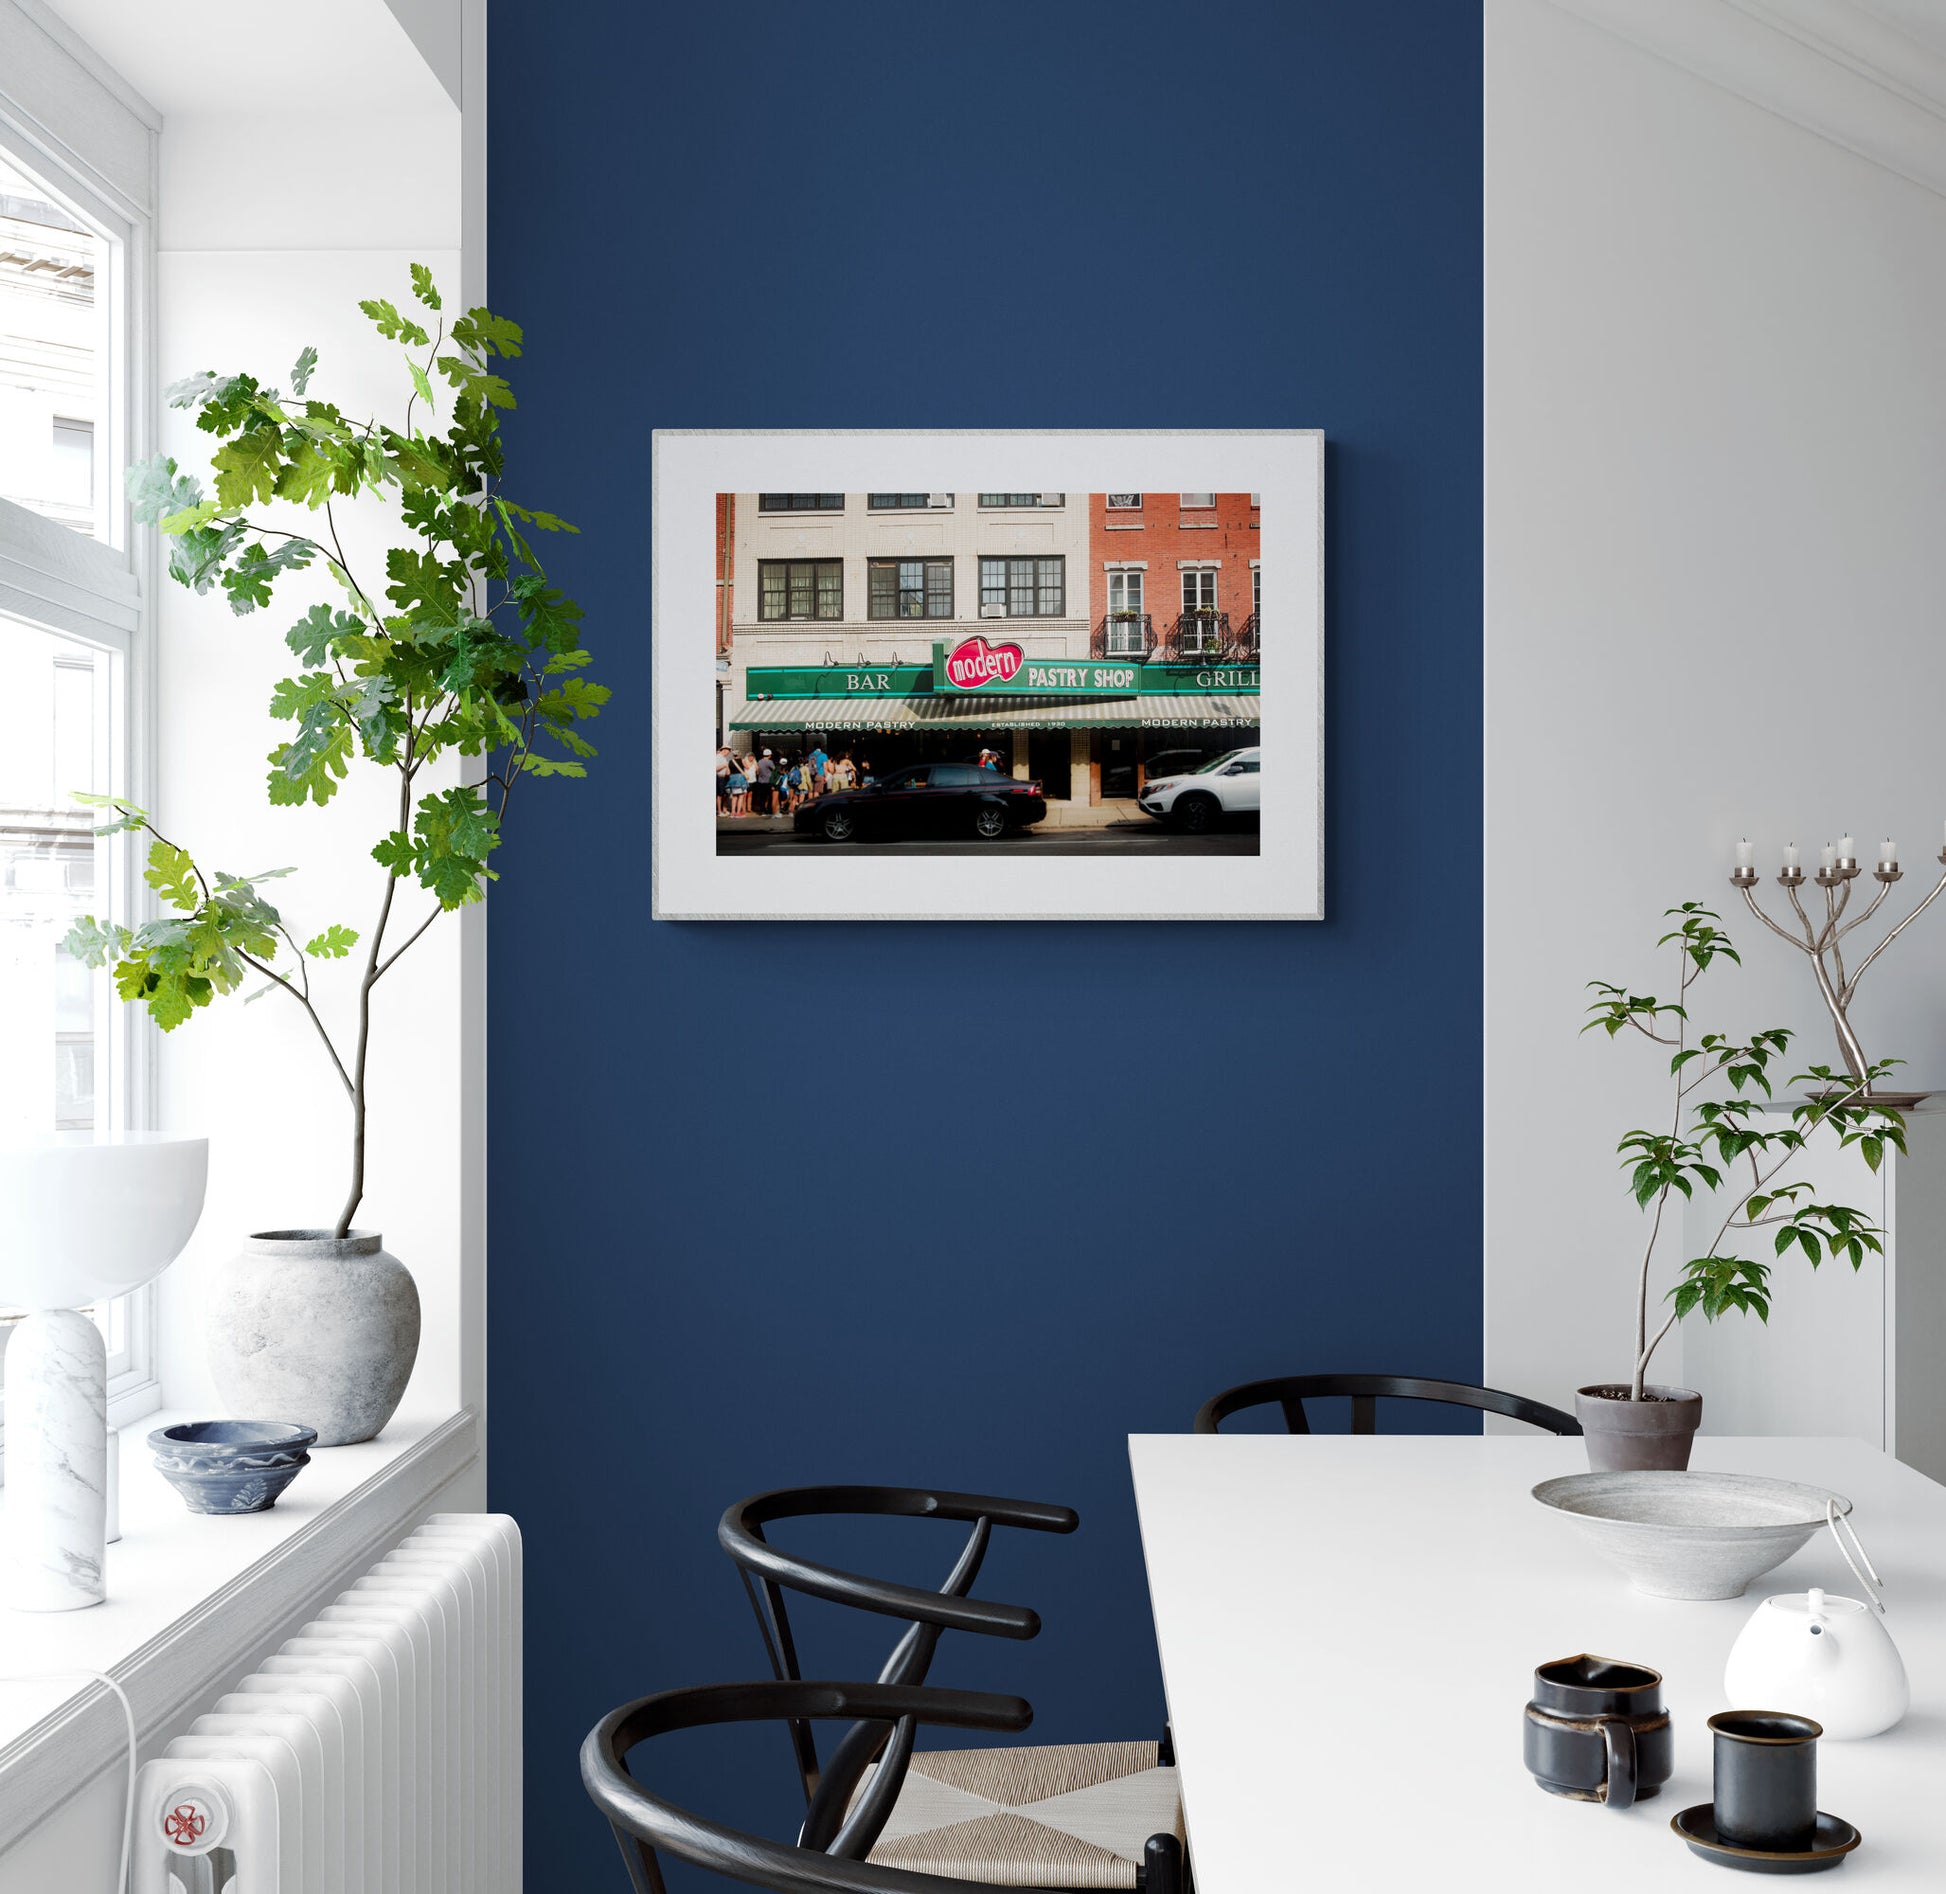 Photograph of Modern Pastry Shop in Boston's North End as Dining Room Wall Art